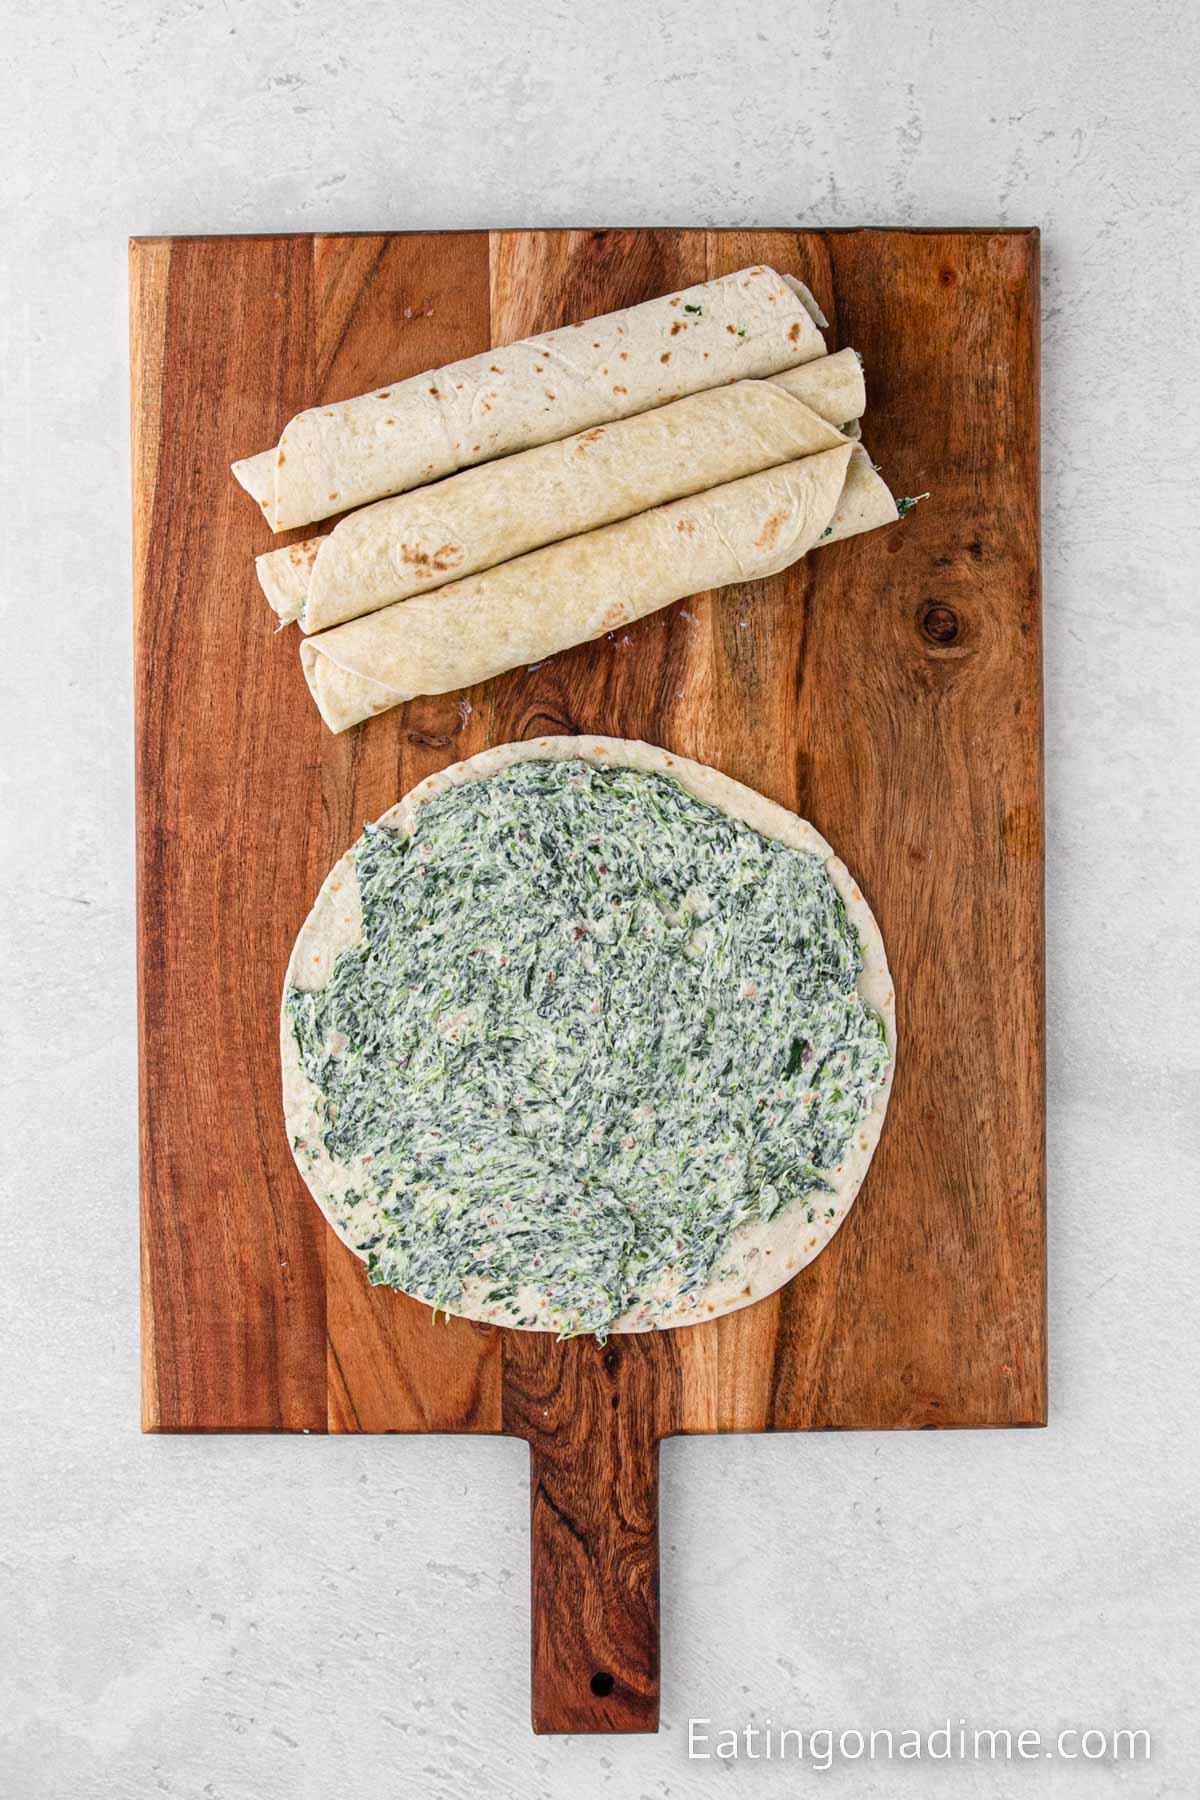 Spread the spinach mixture on a tortilla